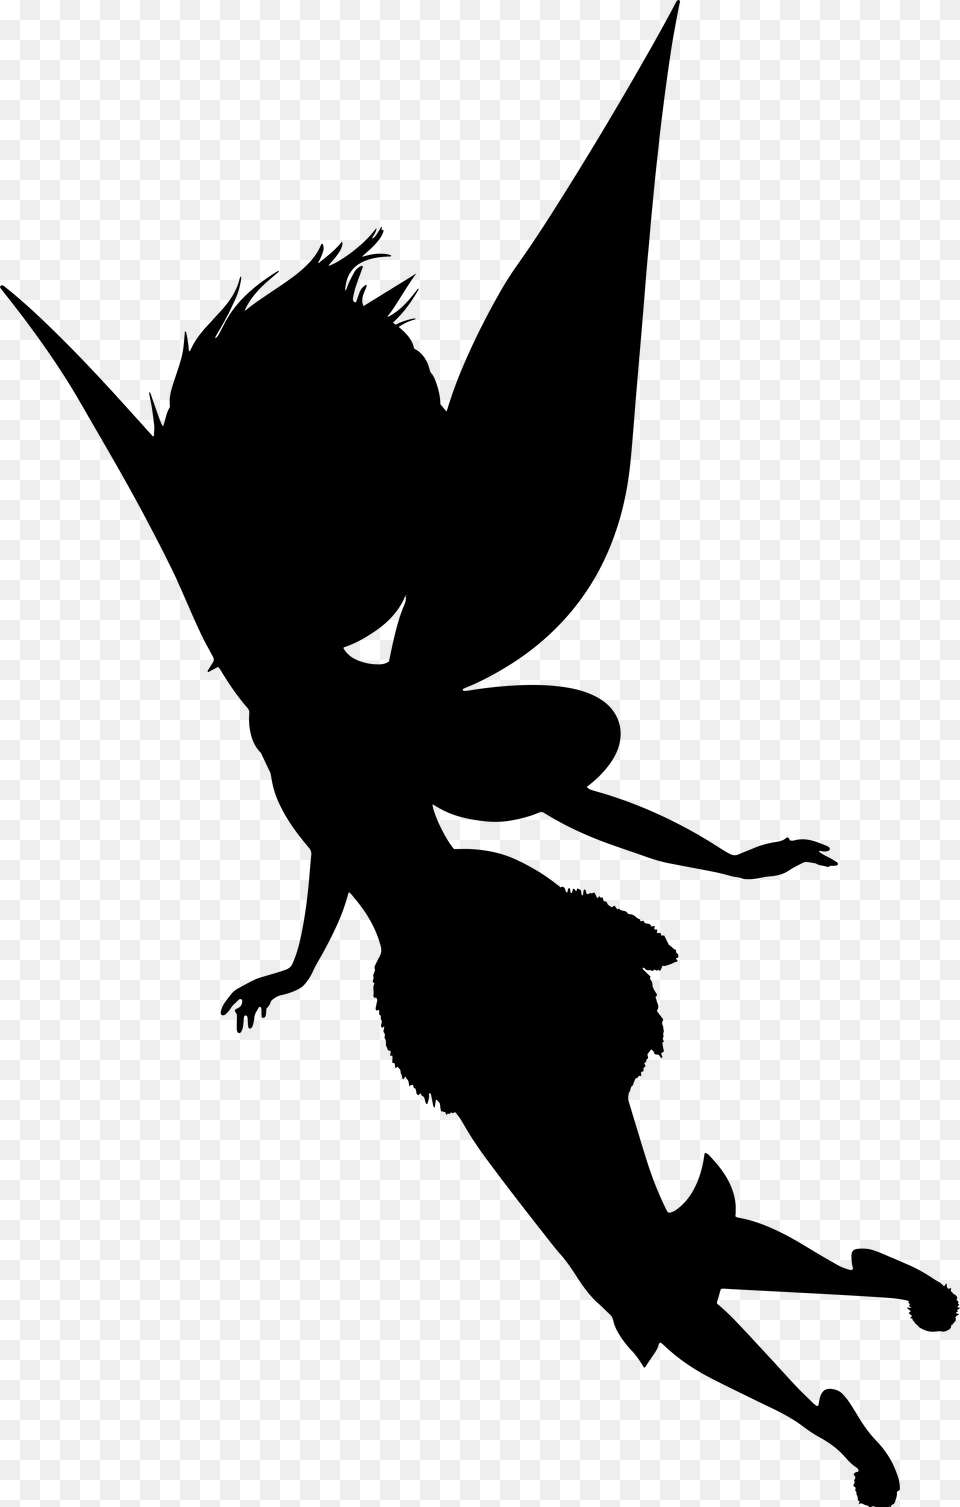 Fairy Silhouette Transparent Clip Art Image Gallery Transparent Background Transparent Fairy, Gray Free Png Download